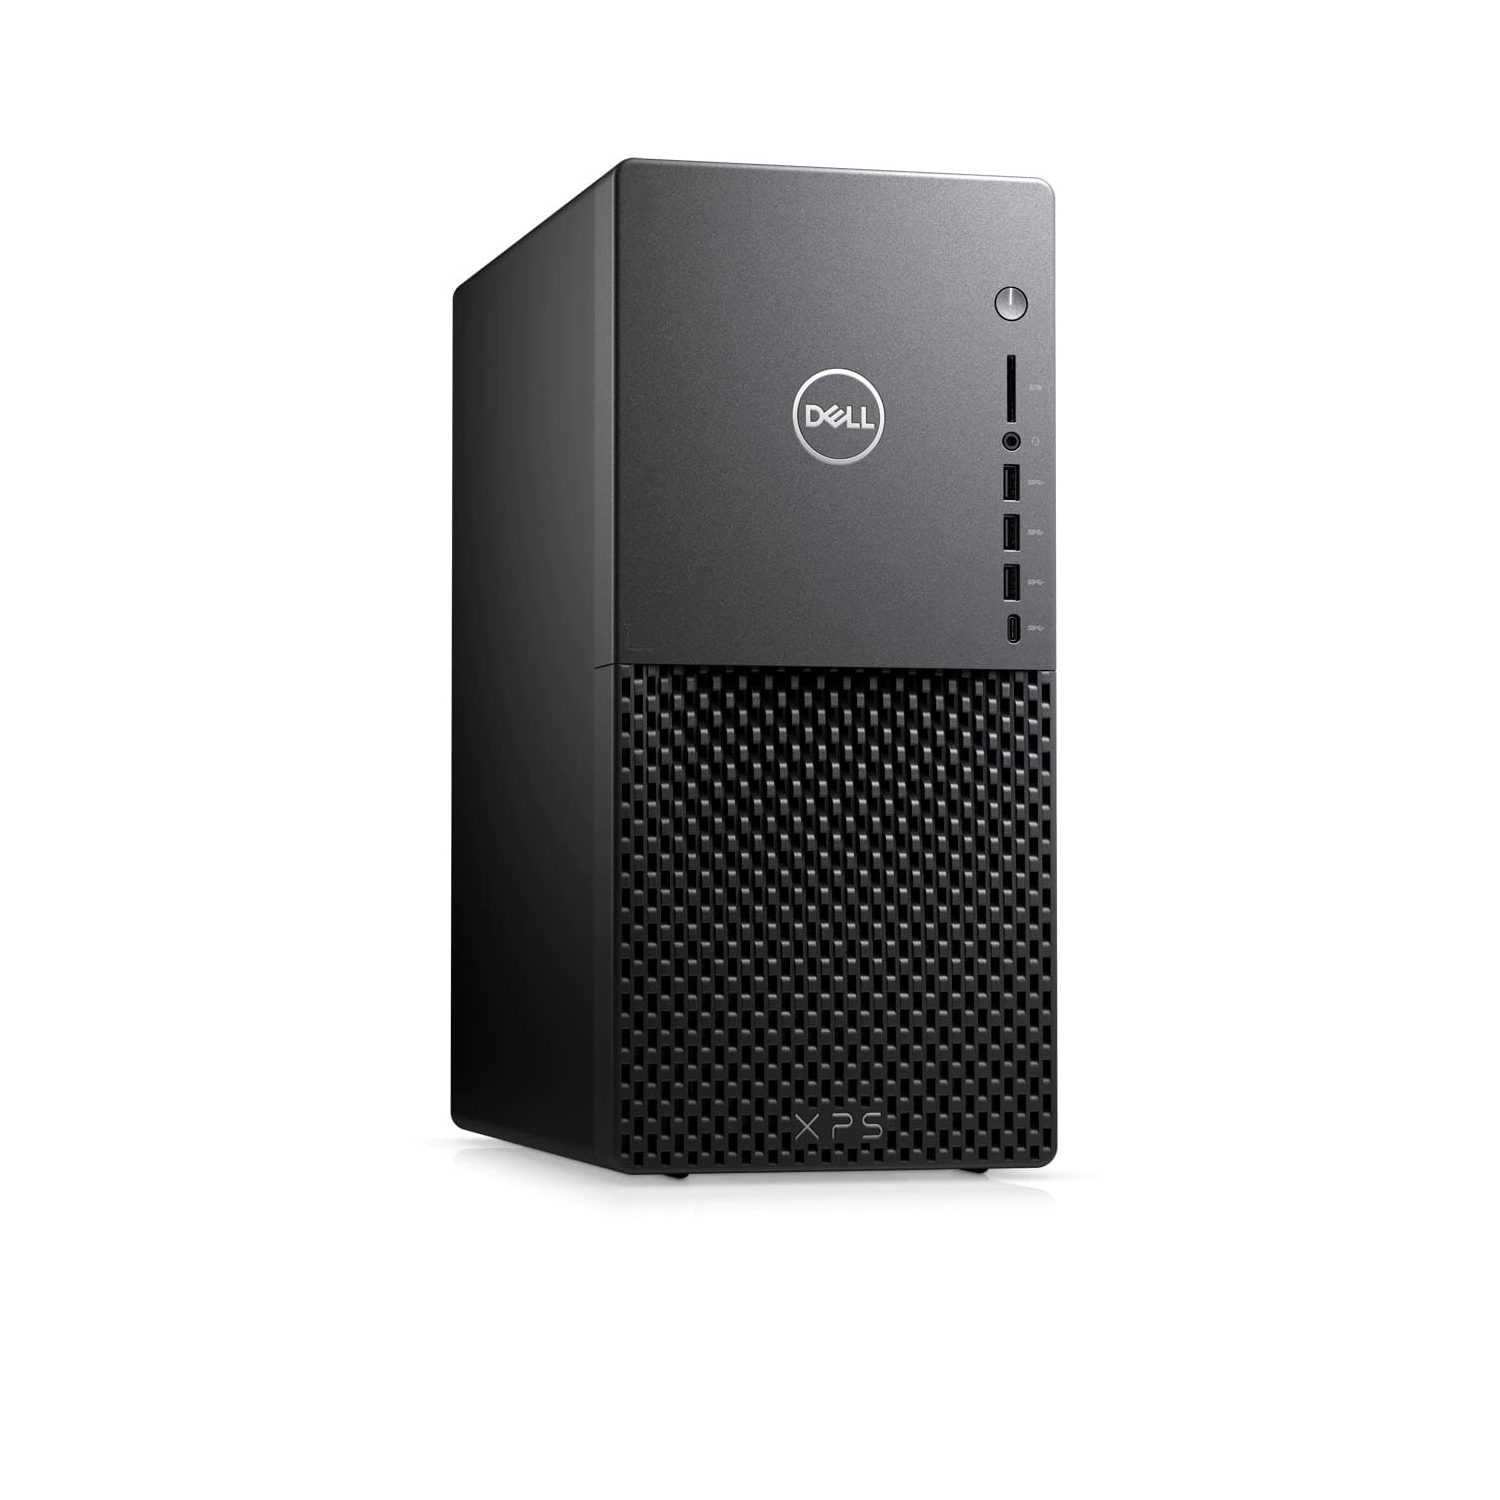 Refurbished (Excellent) - Dell XPS 8940 Desktop (2020) | Core i7 - 1TB HDD + 256GB SSD - 8GB RAM - GTX 1660 | 8 Cores @ 4.9 GHz - 11th Gen CPU Certified Refurbished